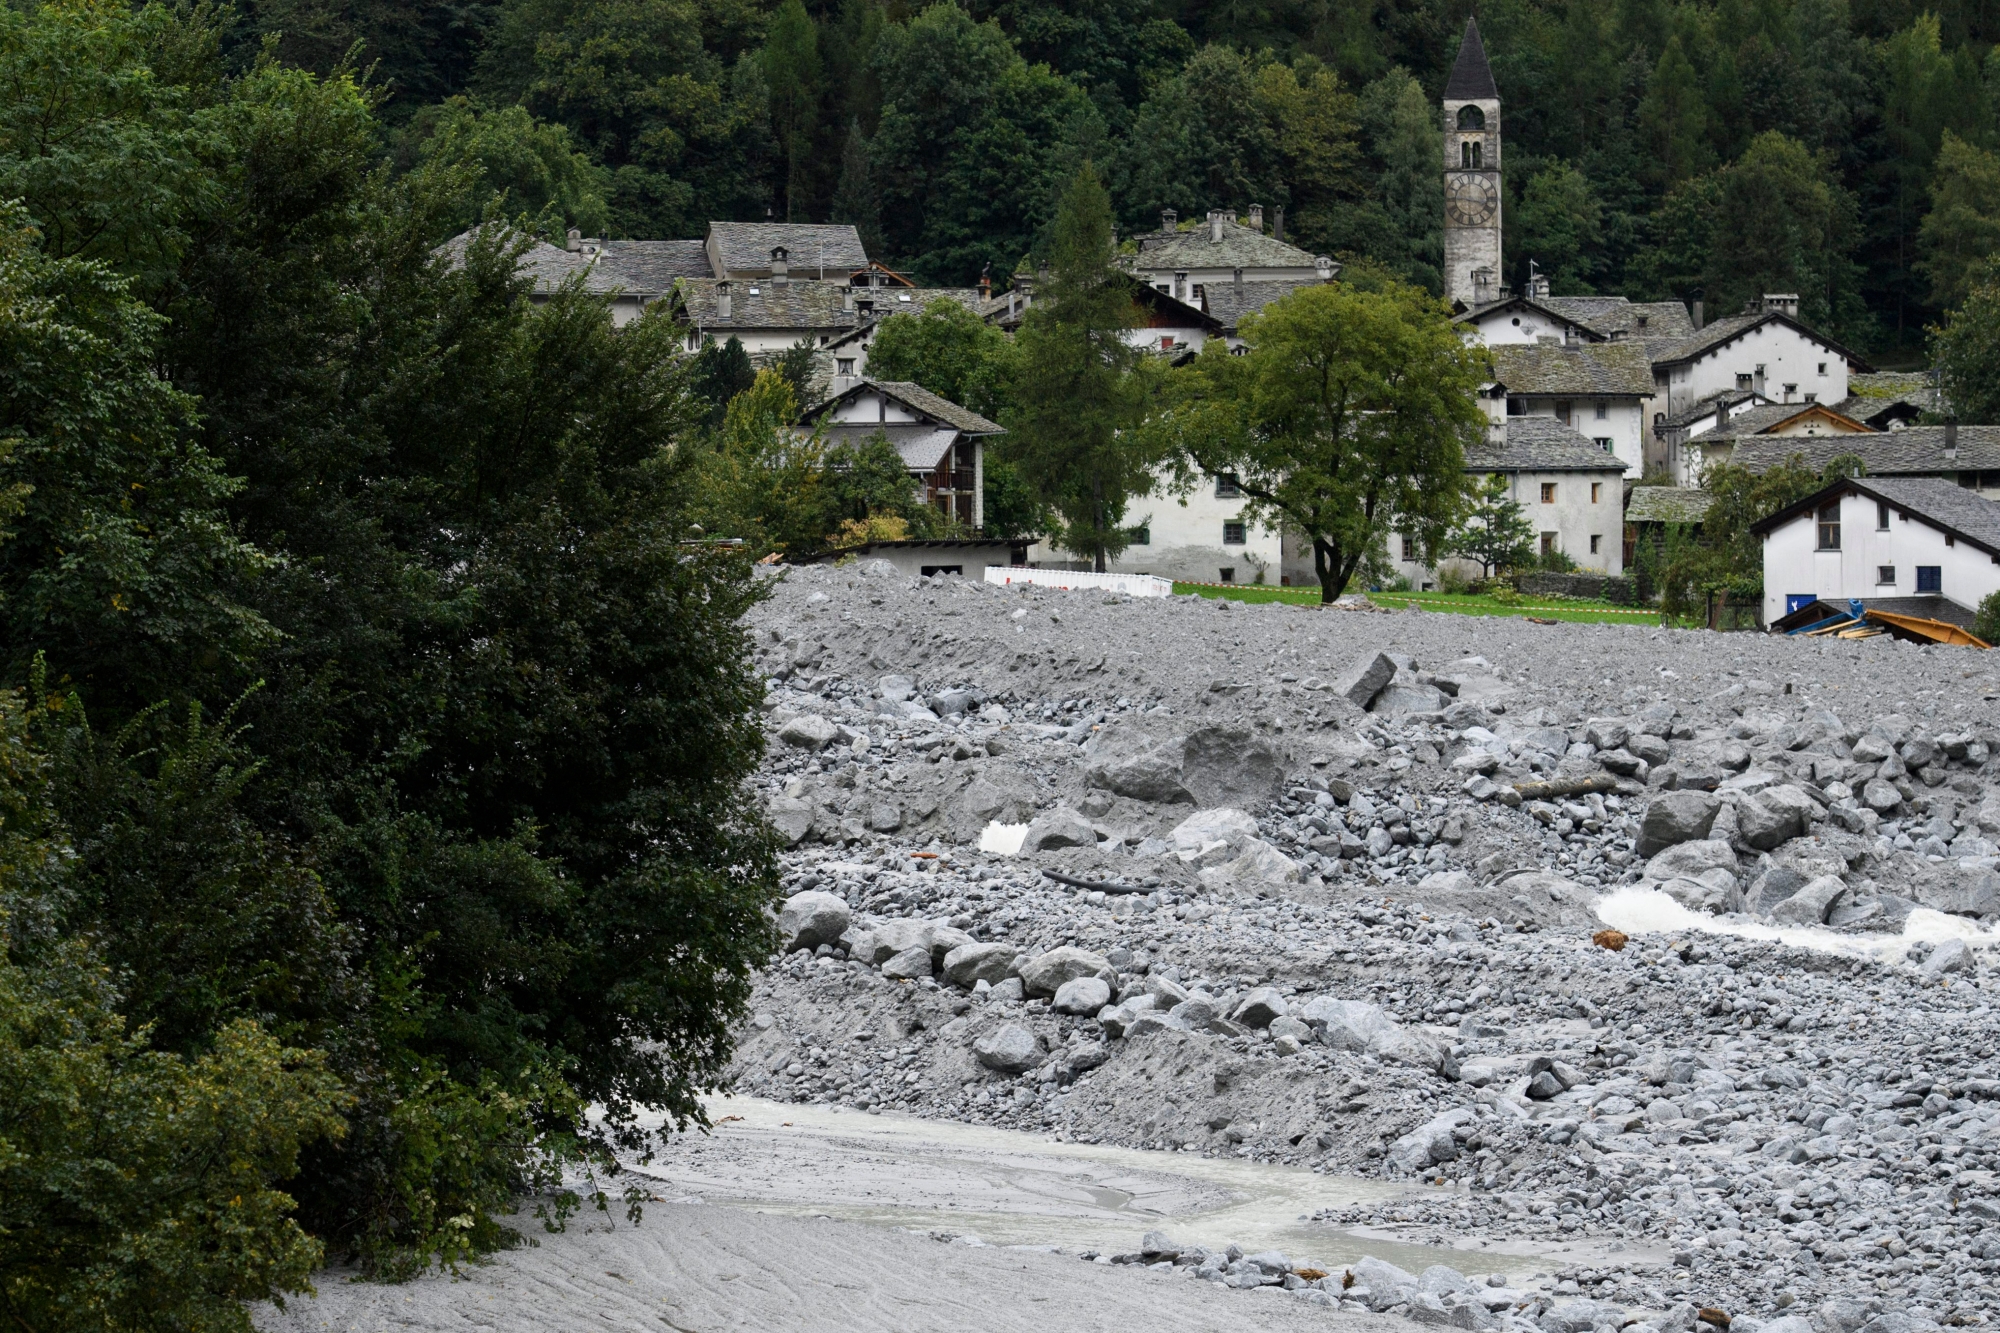 View of bondo, pictured during a media tour in the evacuated village of Bondo on Sunday, September 10, 2017, in Bondo, Switzerland. The village has been hit by a massive landslide on August 23. Eight people have been declared missing. (KEYSTONE POOL/Gian Ehrenzeller) SCHWEIZ BONDO BERGSTURZ